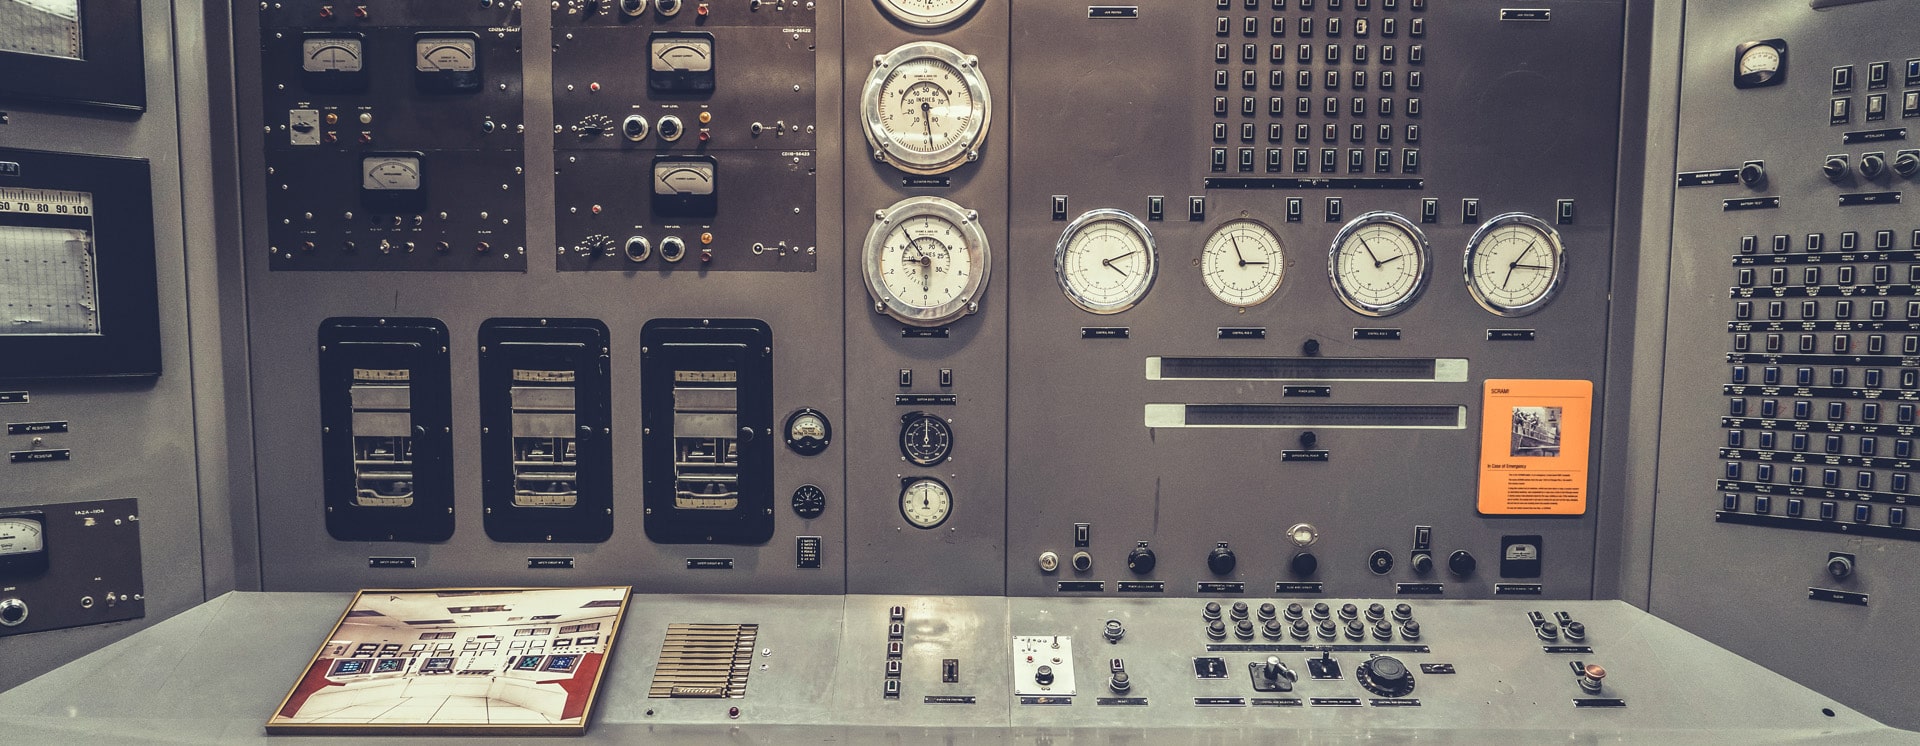 Control panel for nuclear reactor built in the 1950s with an array of buttons, dials and gauges